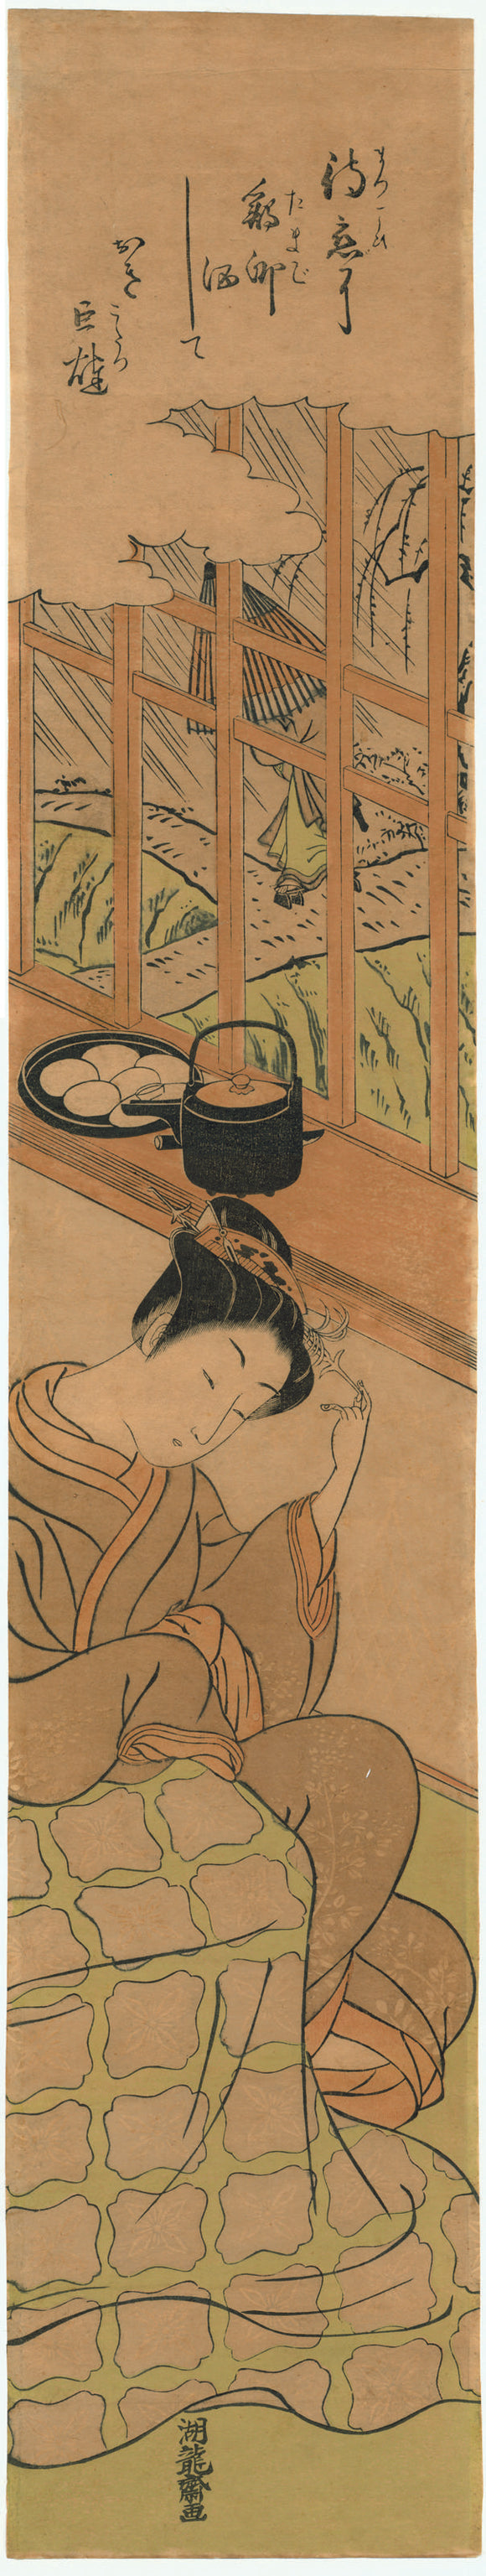 Isoda Koryūsai: Seated Courtesan Waiting for her Lover